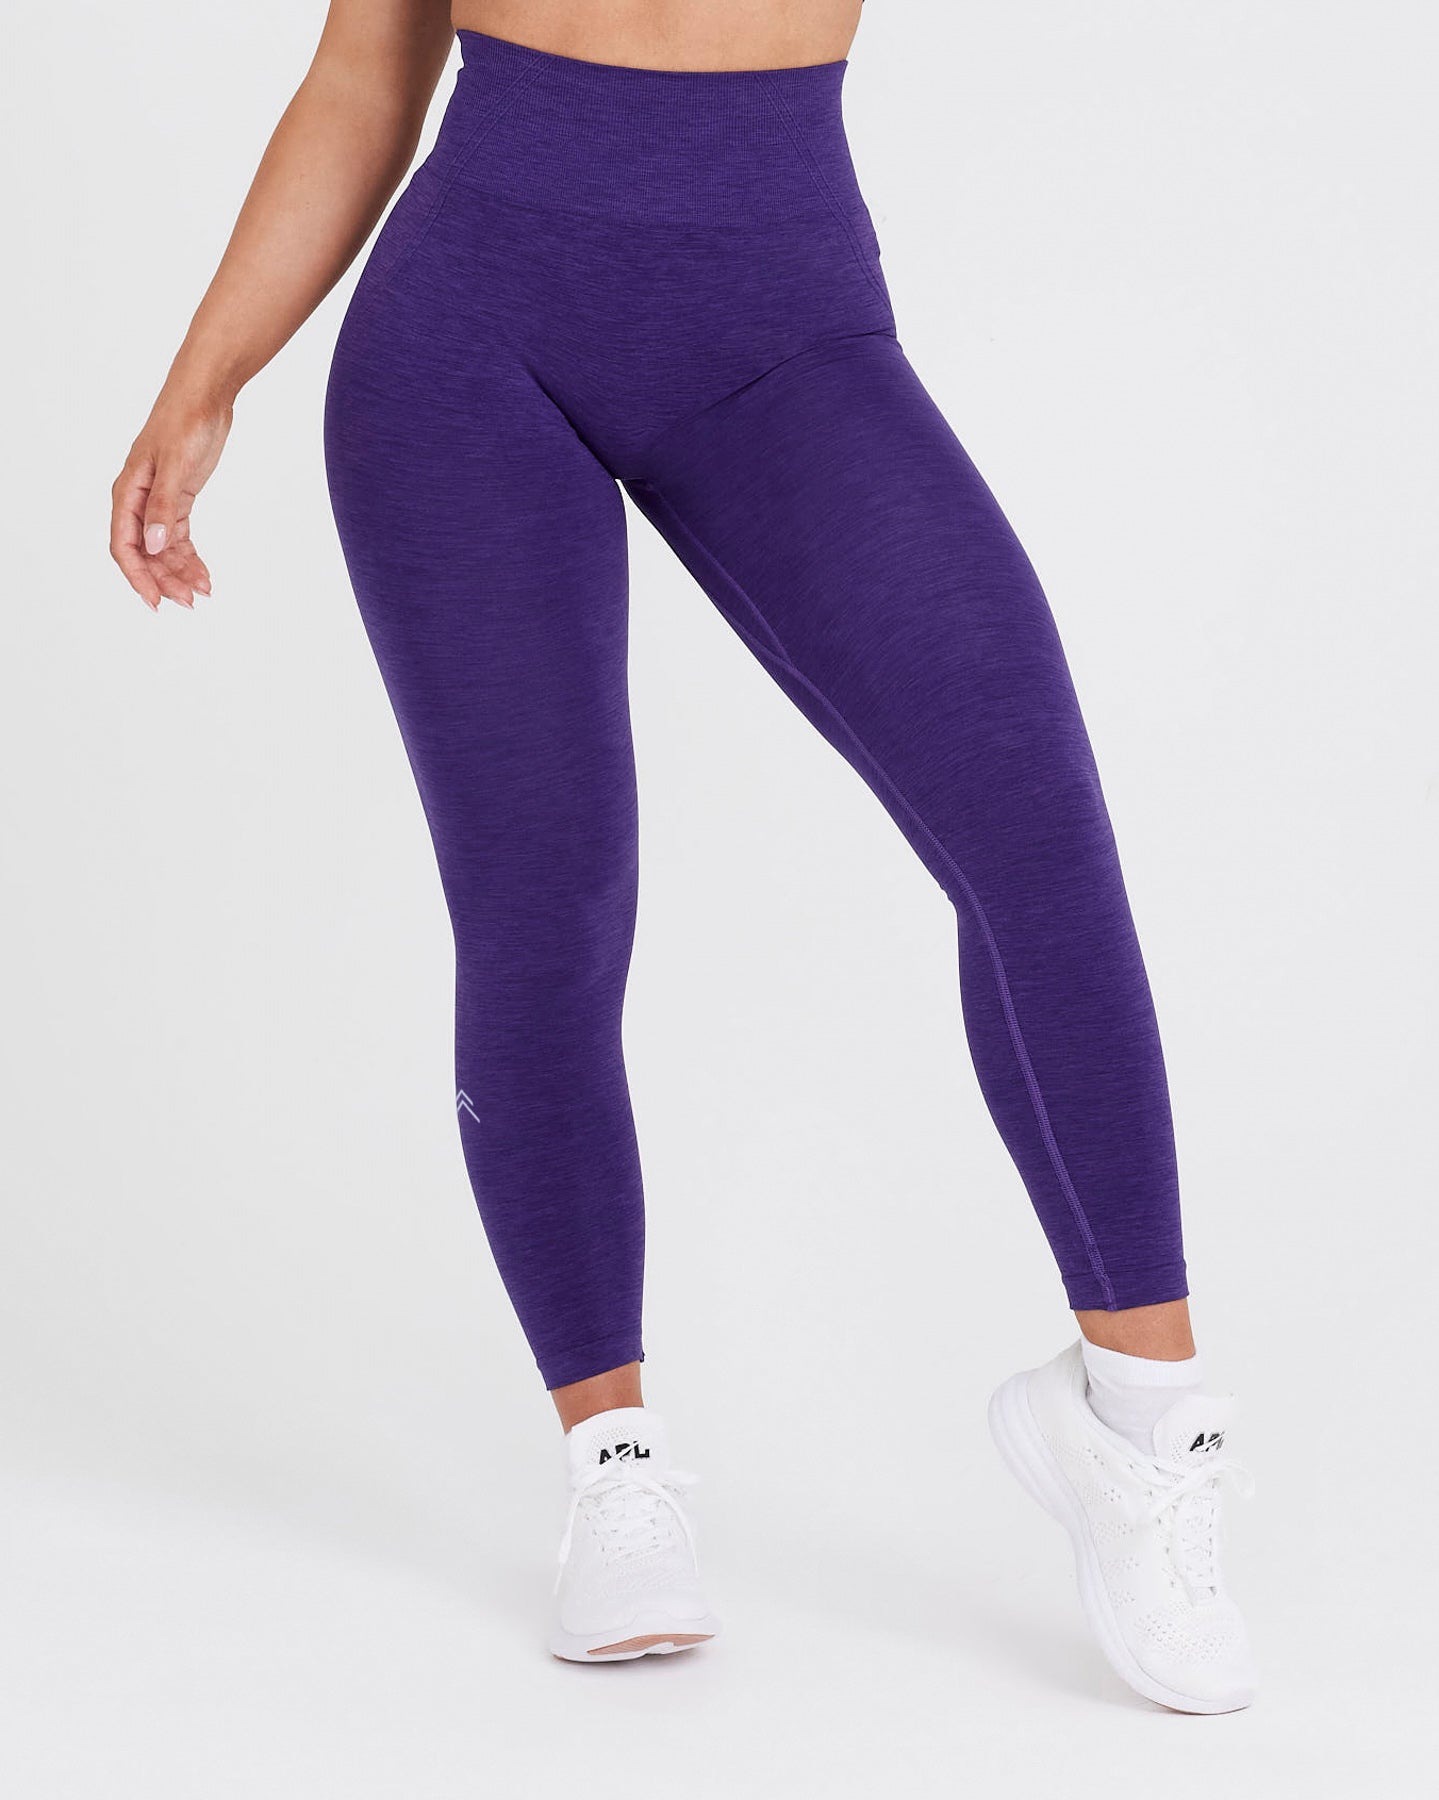 Love & Other Things gym seamless leggings in purple